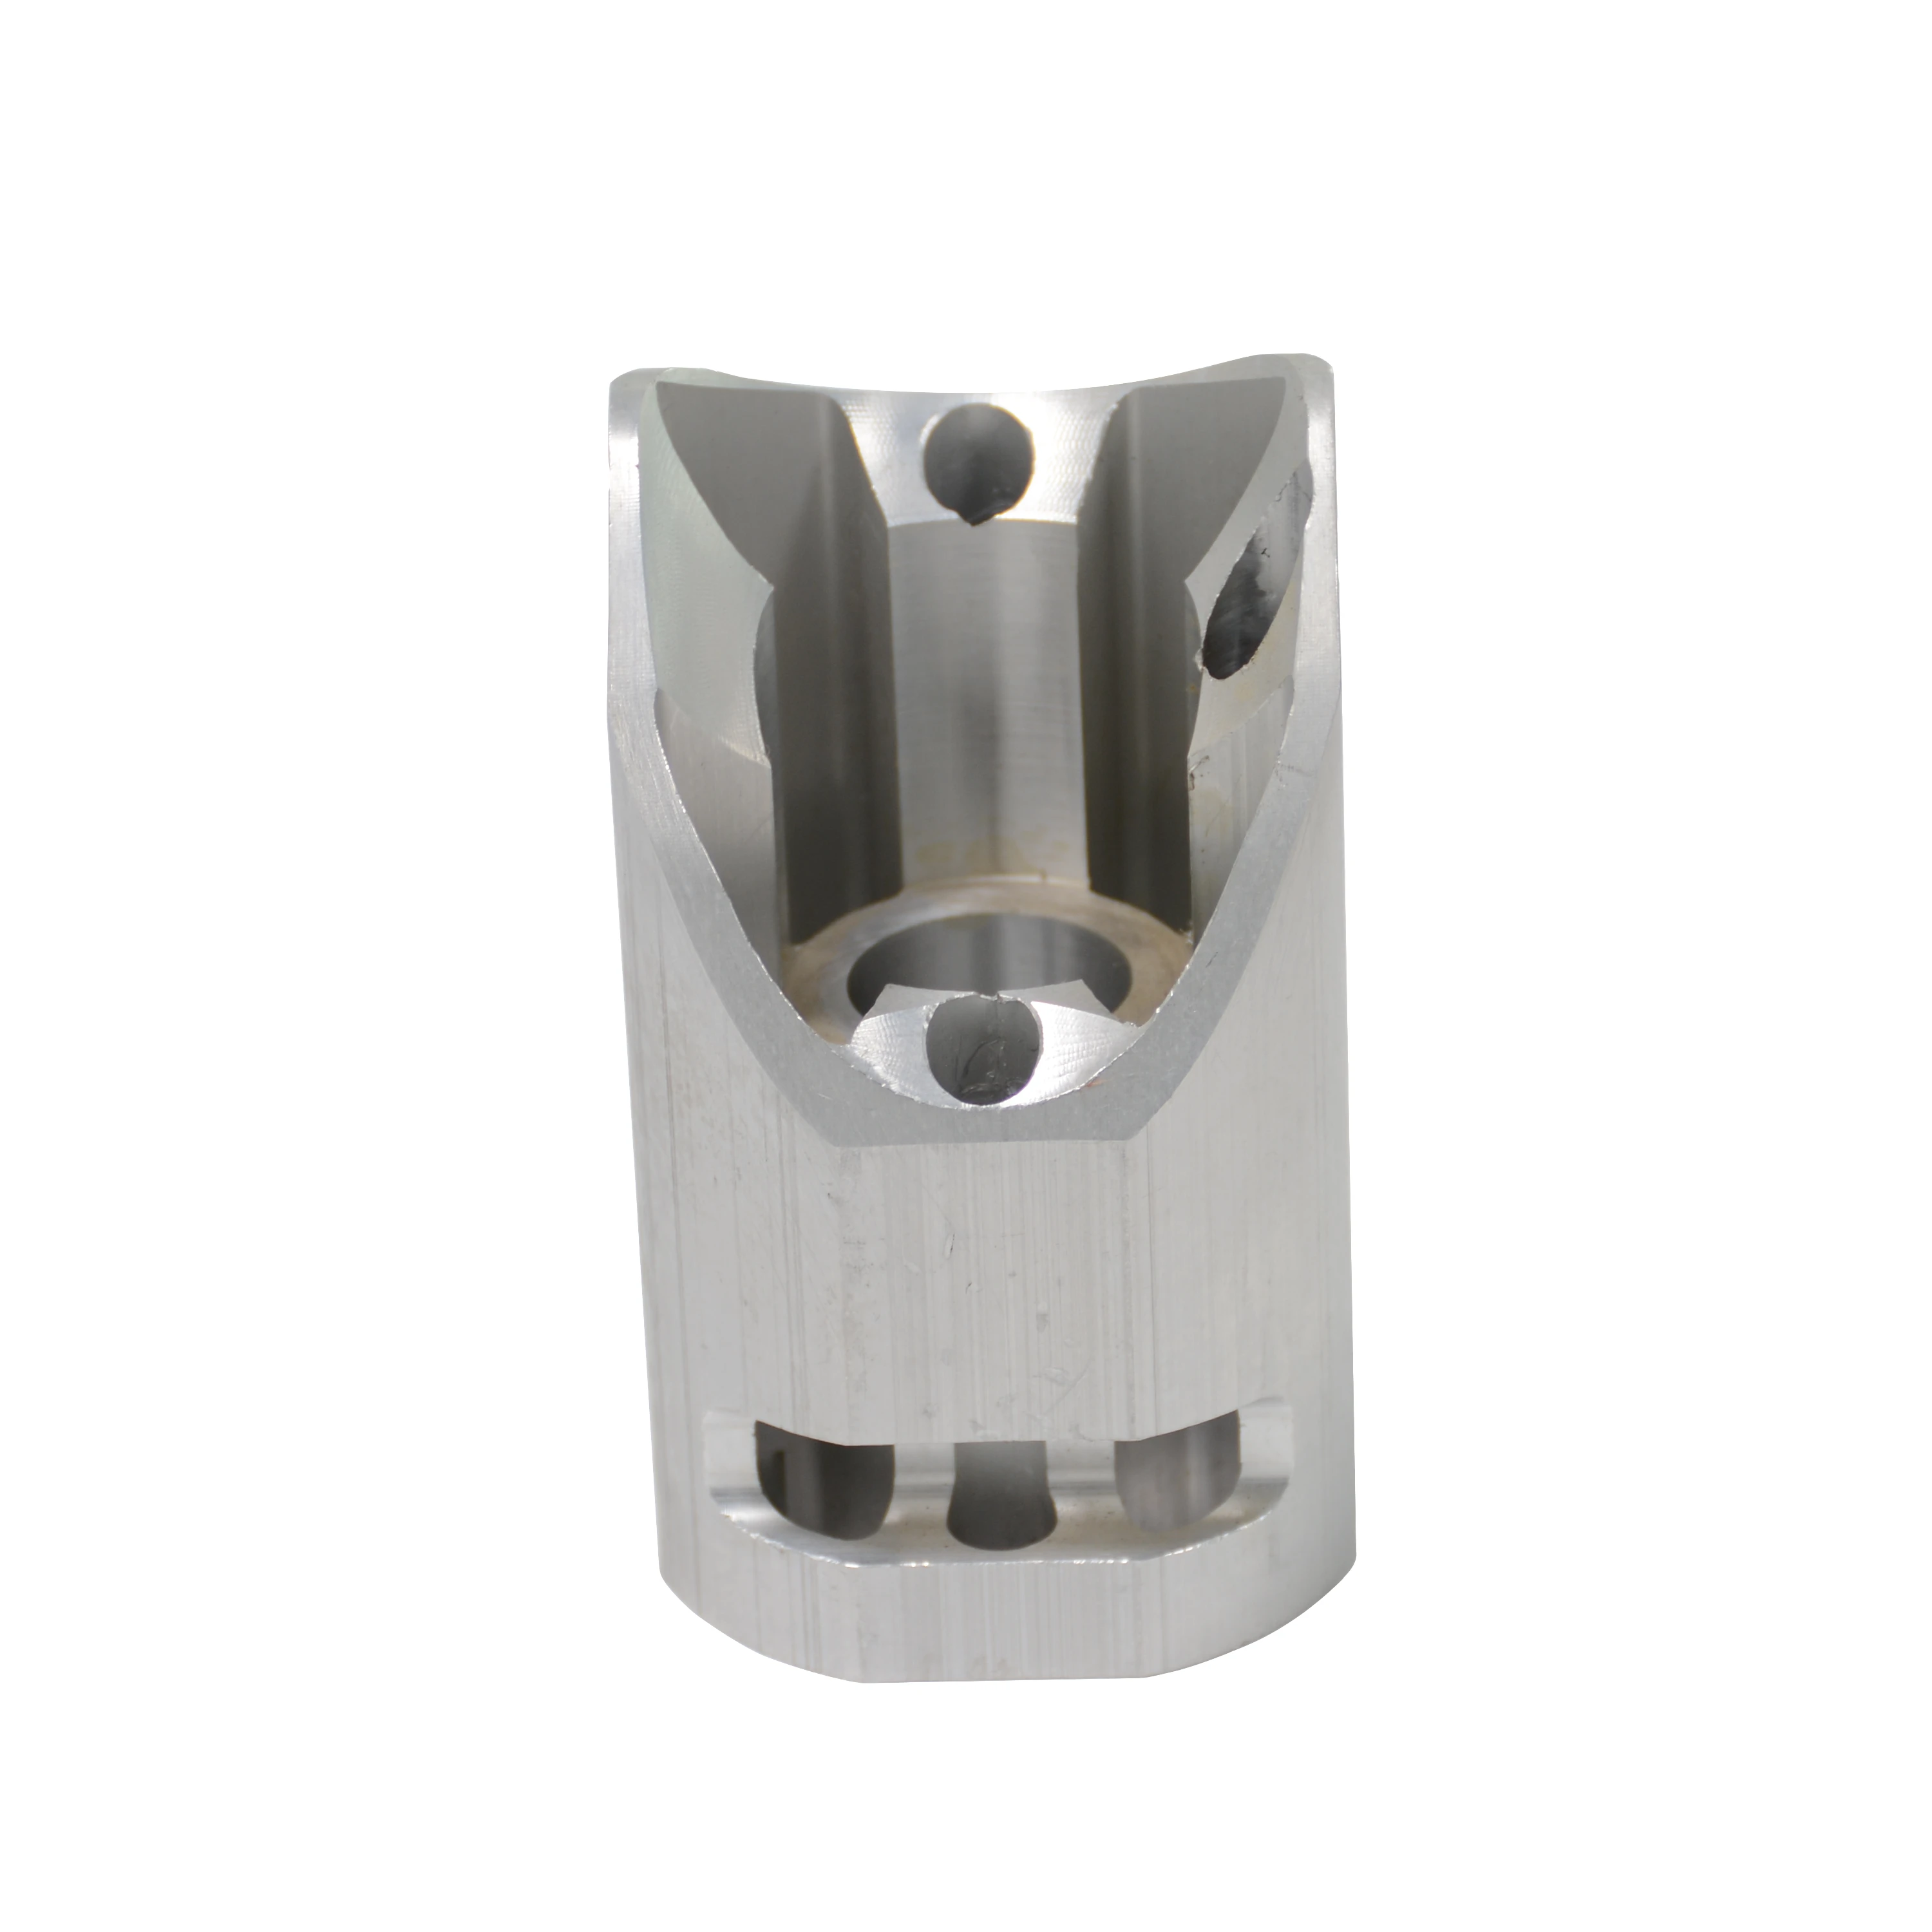 OEM customized 4 axis CNC turning parts  CNC machining services